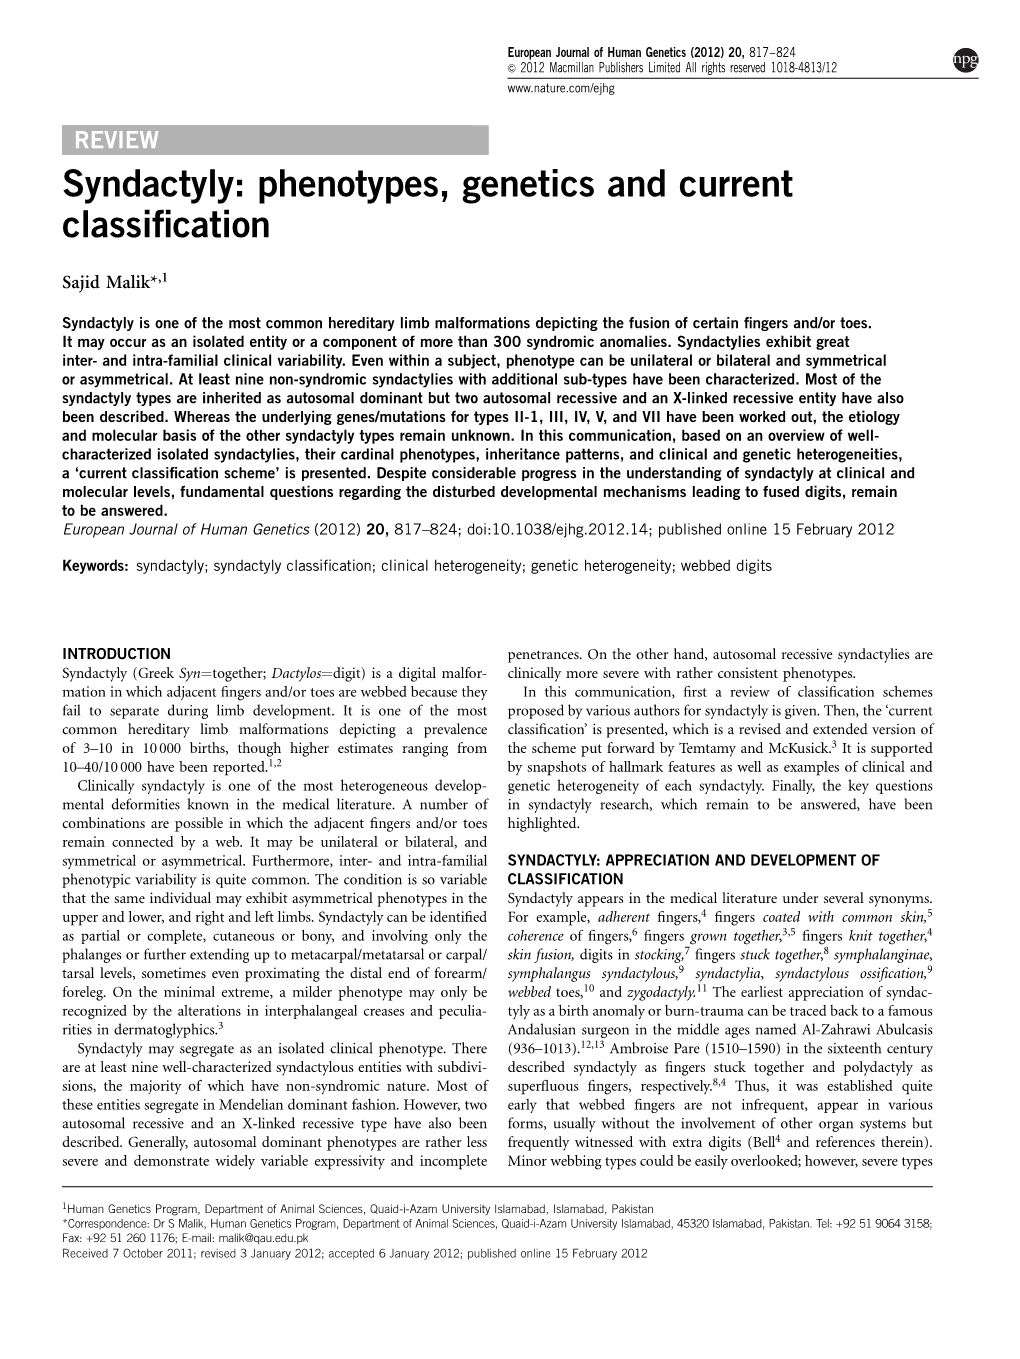 Syndactyly: Phenotypes, Genetics and Current Classification